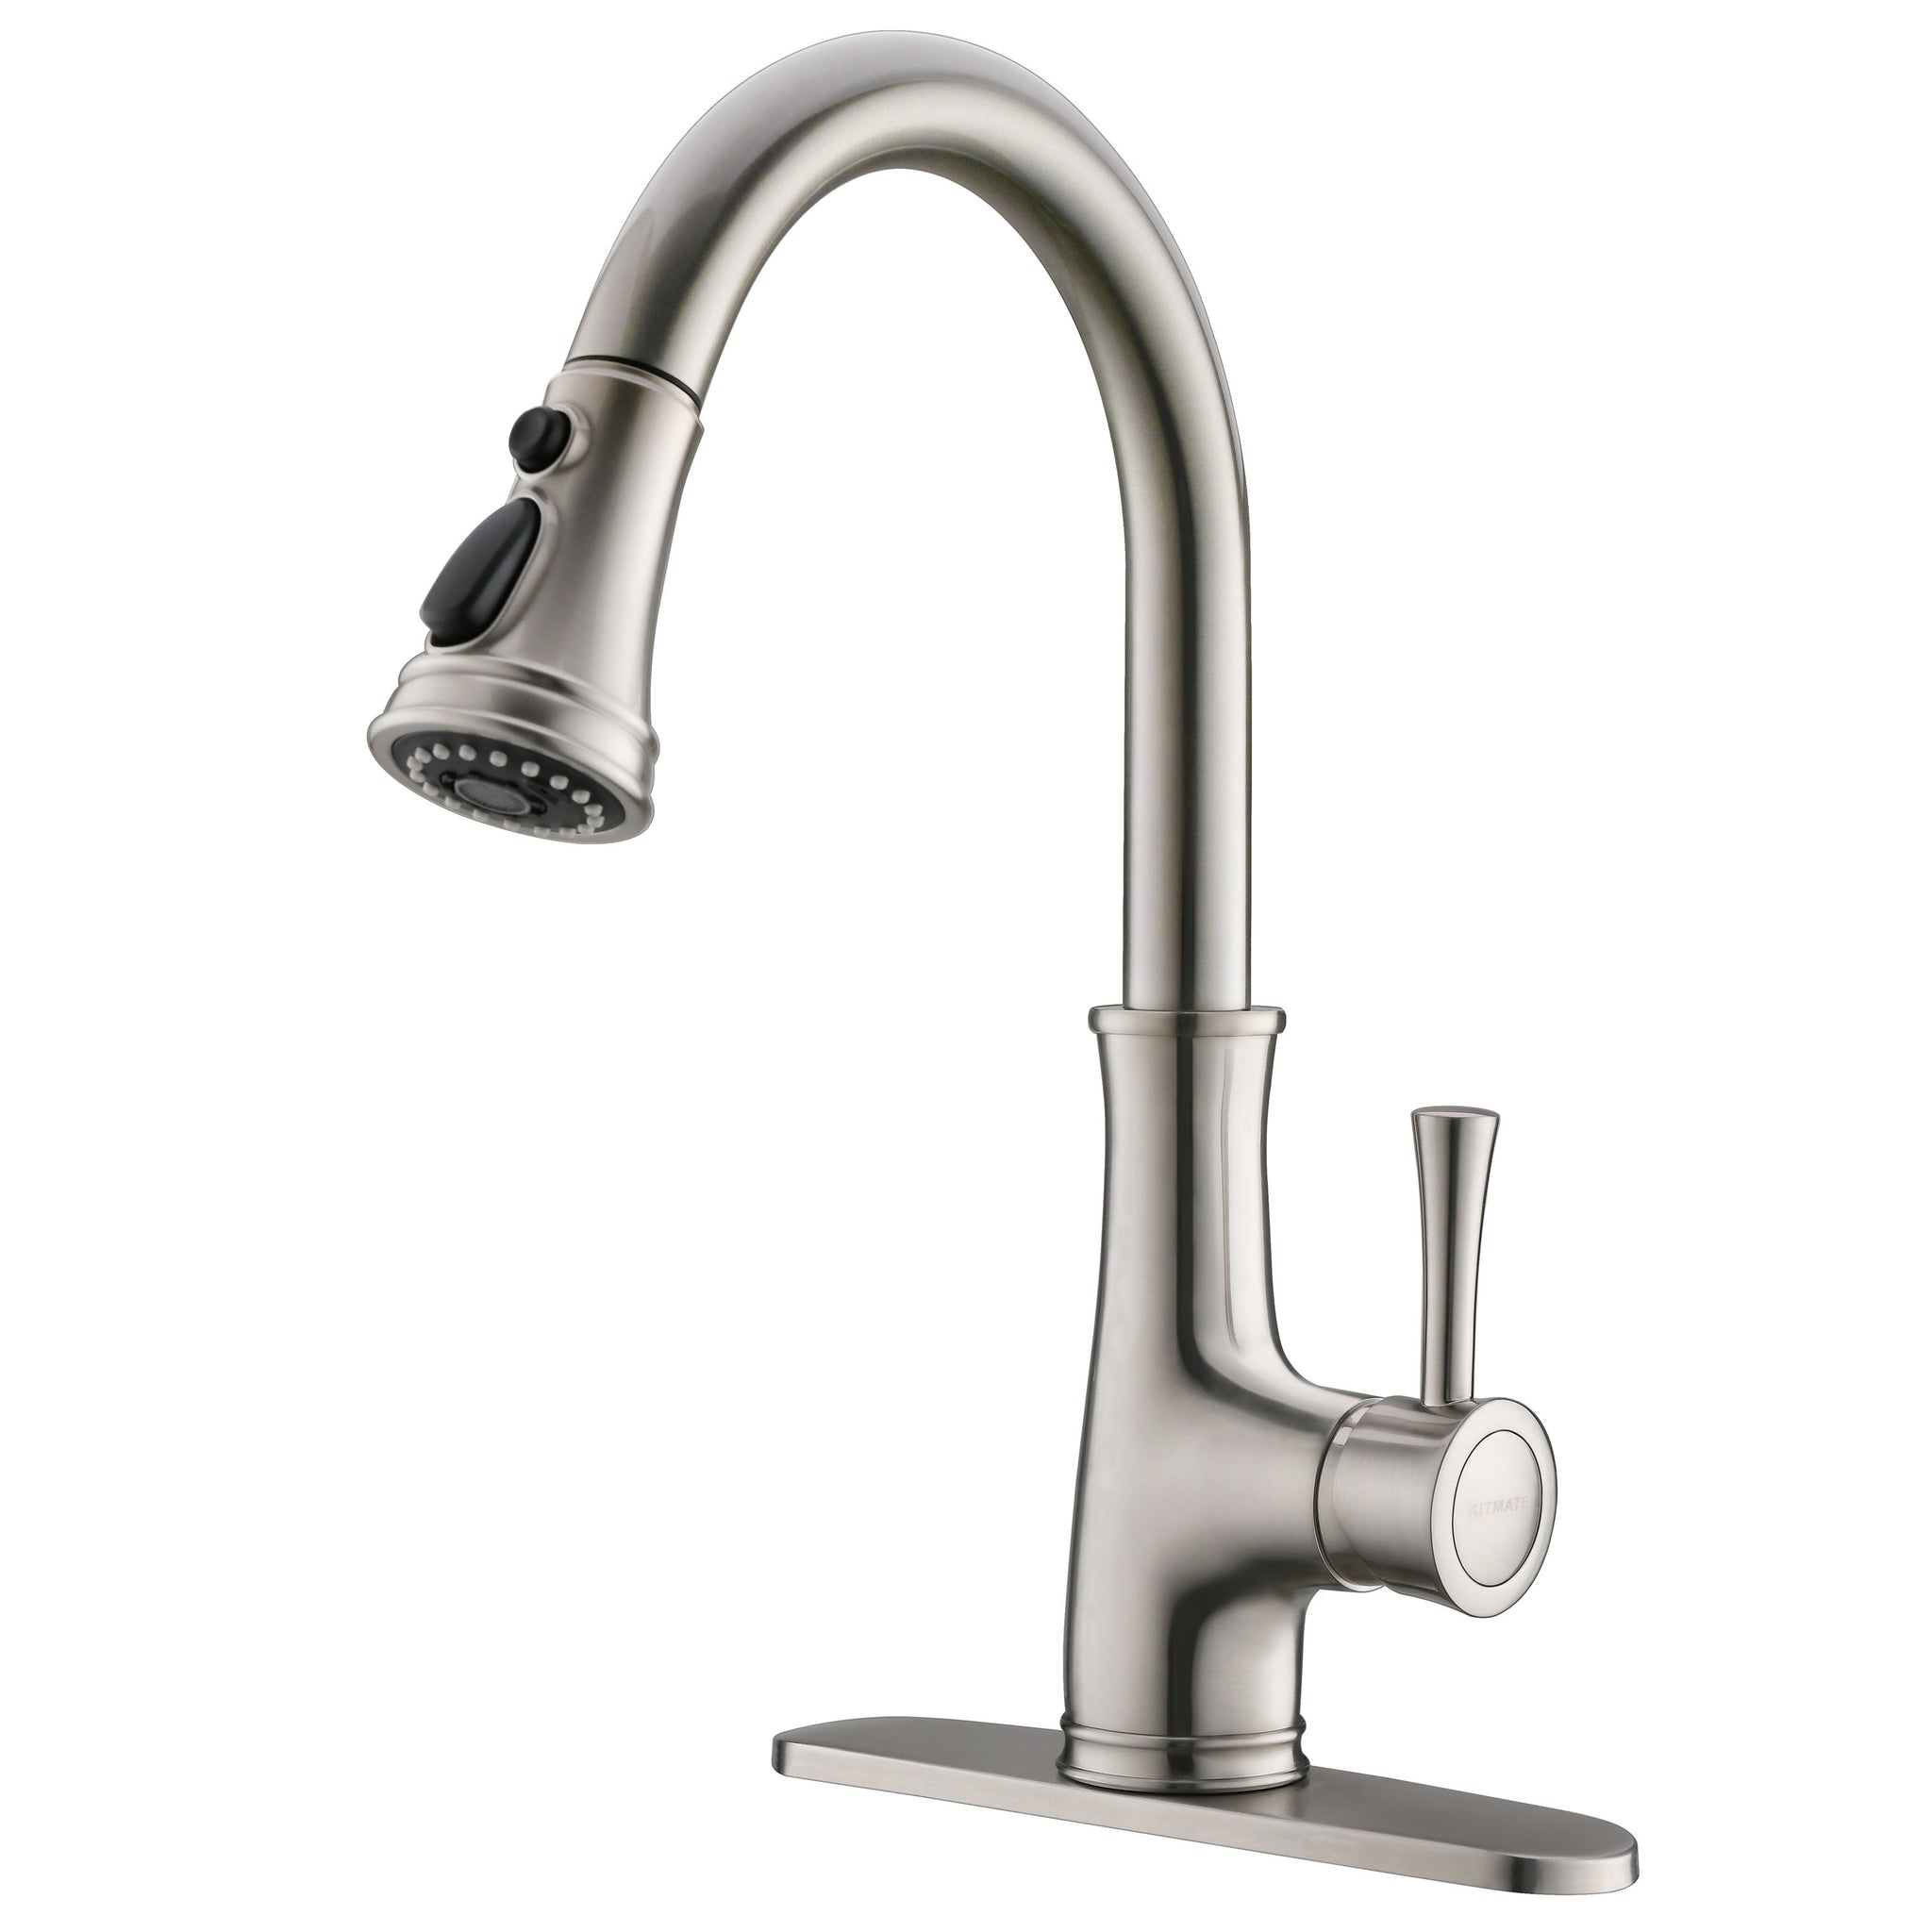 Single-Handle No Sensor Gooseneck Pull-Down Sprayer Kitchen Faucet with Deckplate Included in Brushed Nickel